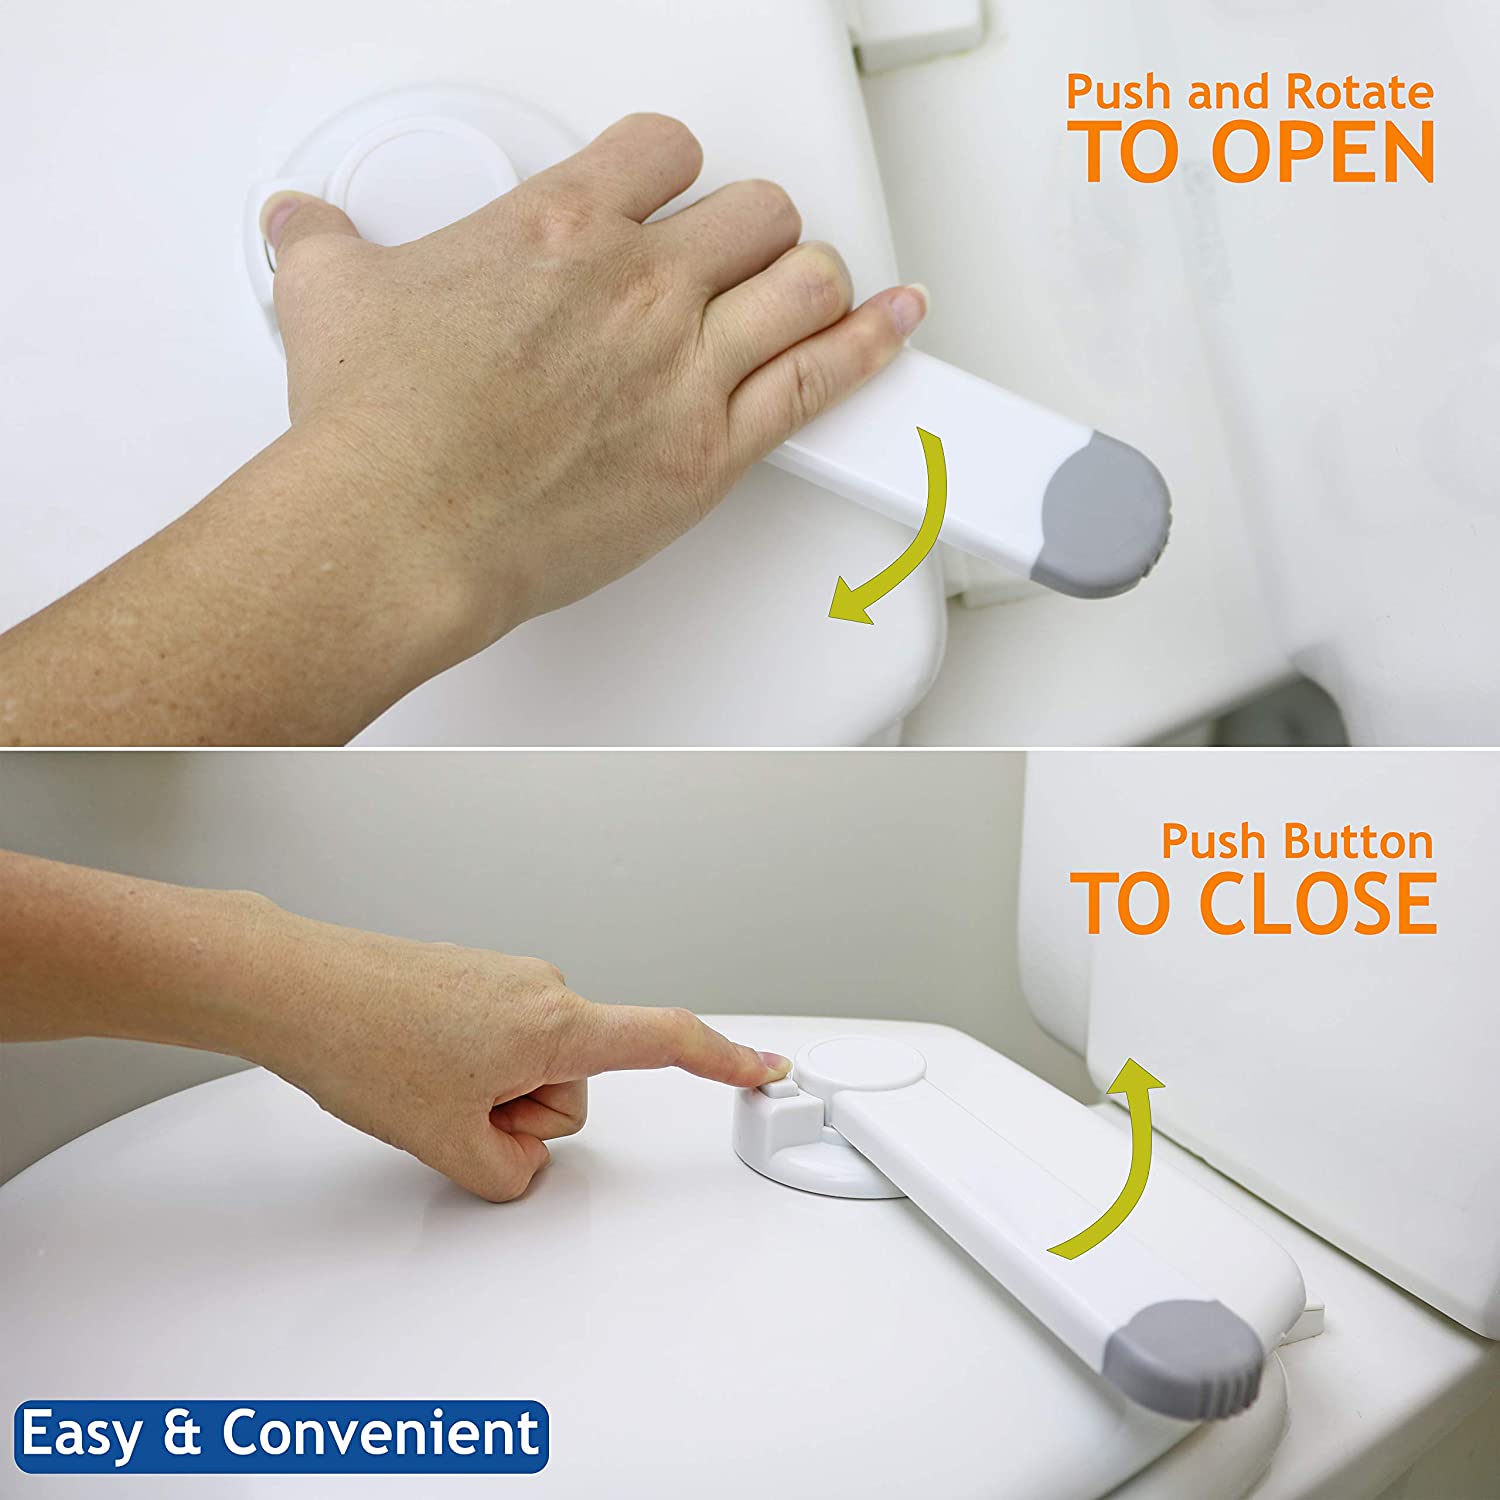 Baby Toilet Lock (2 Pack) Ideal Baby Proof Toilet Lid Lock with Arm